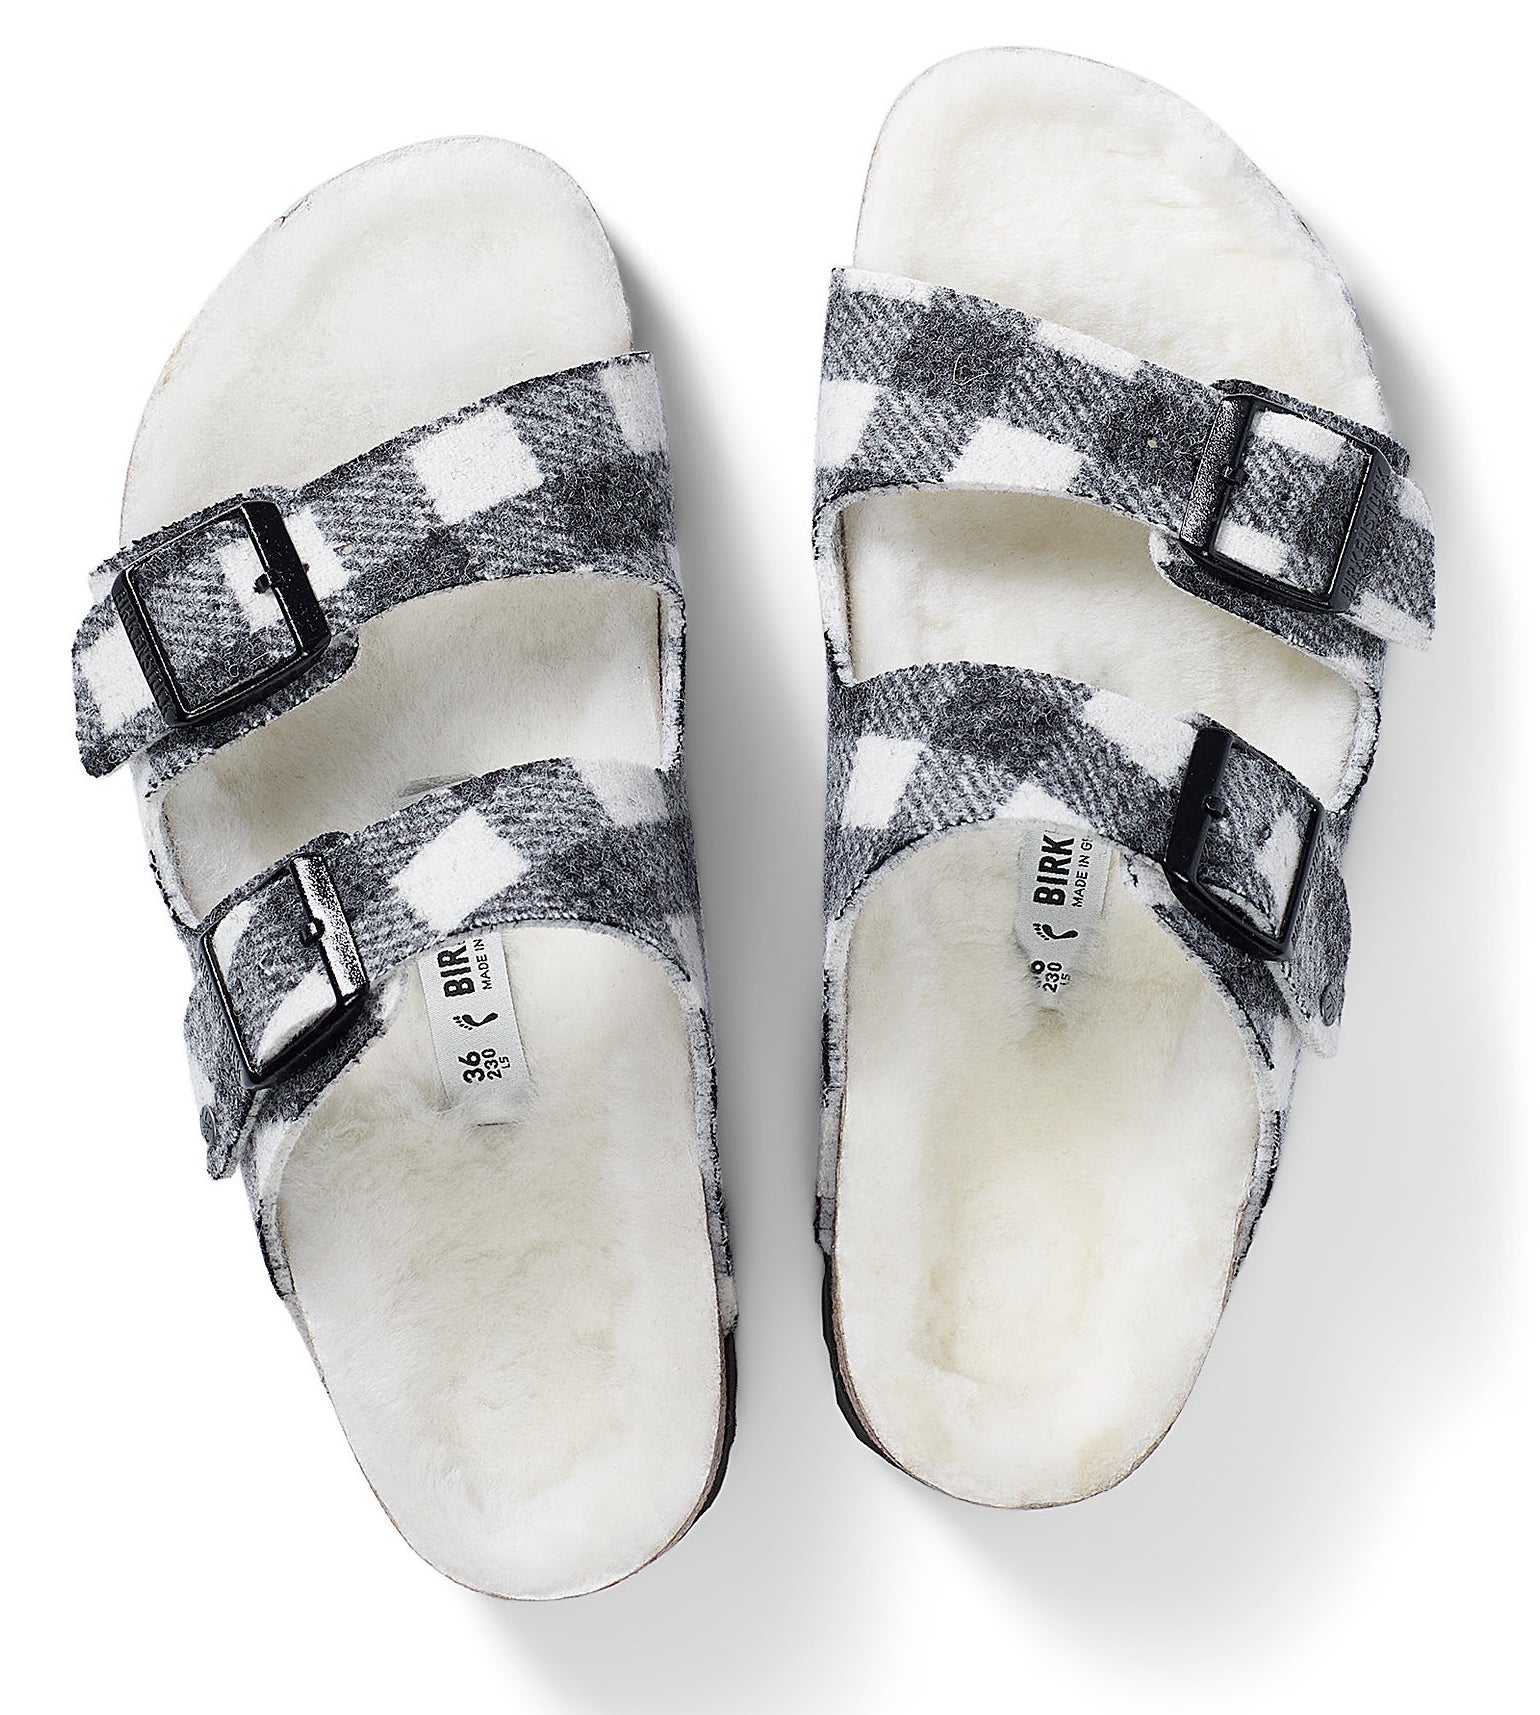 A pair of Birkenstock sandals with sheepskin lining